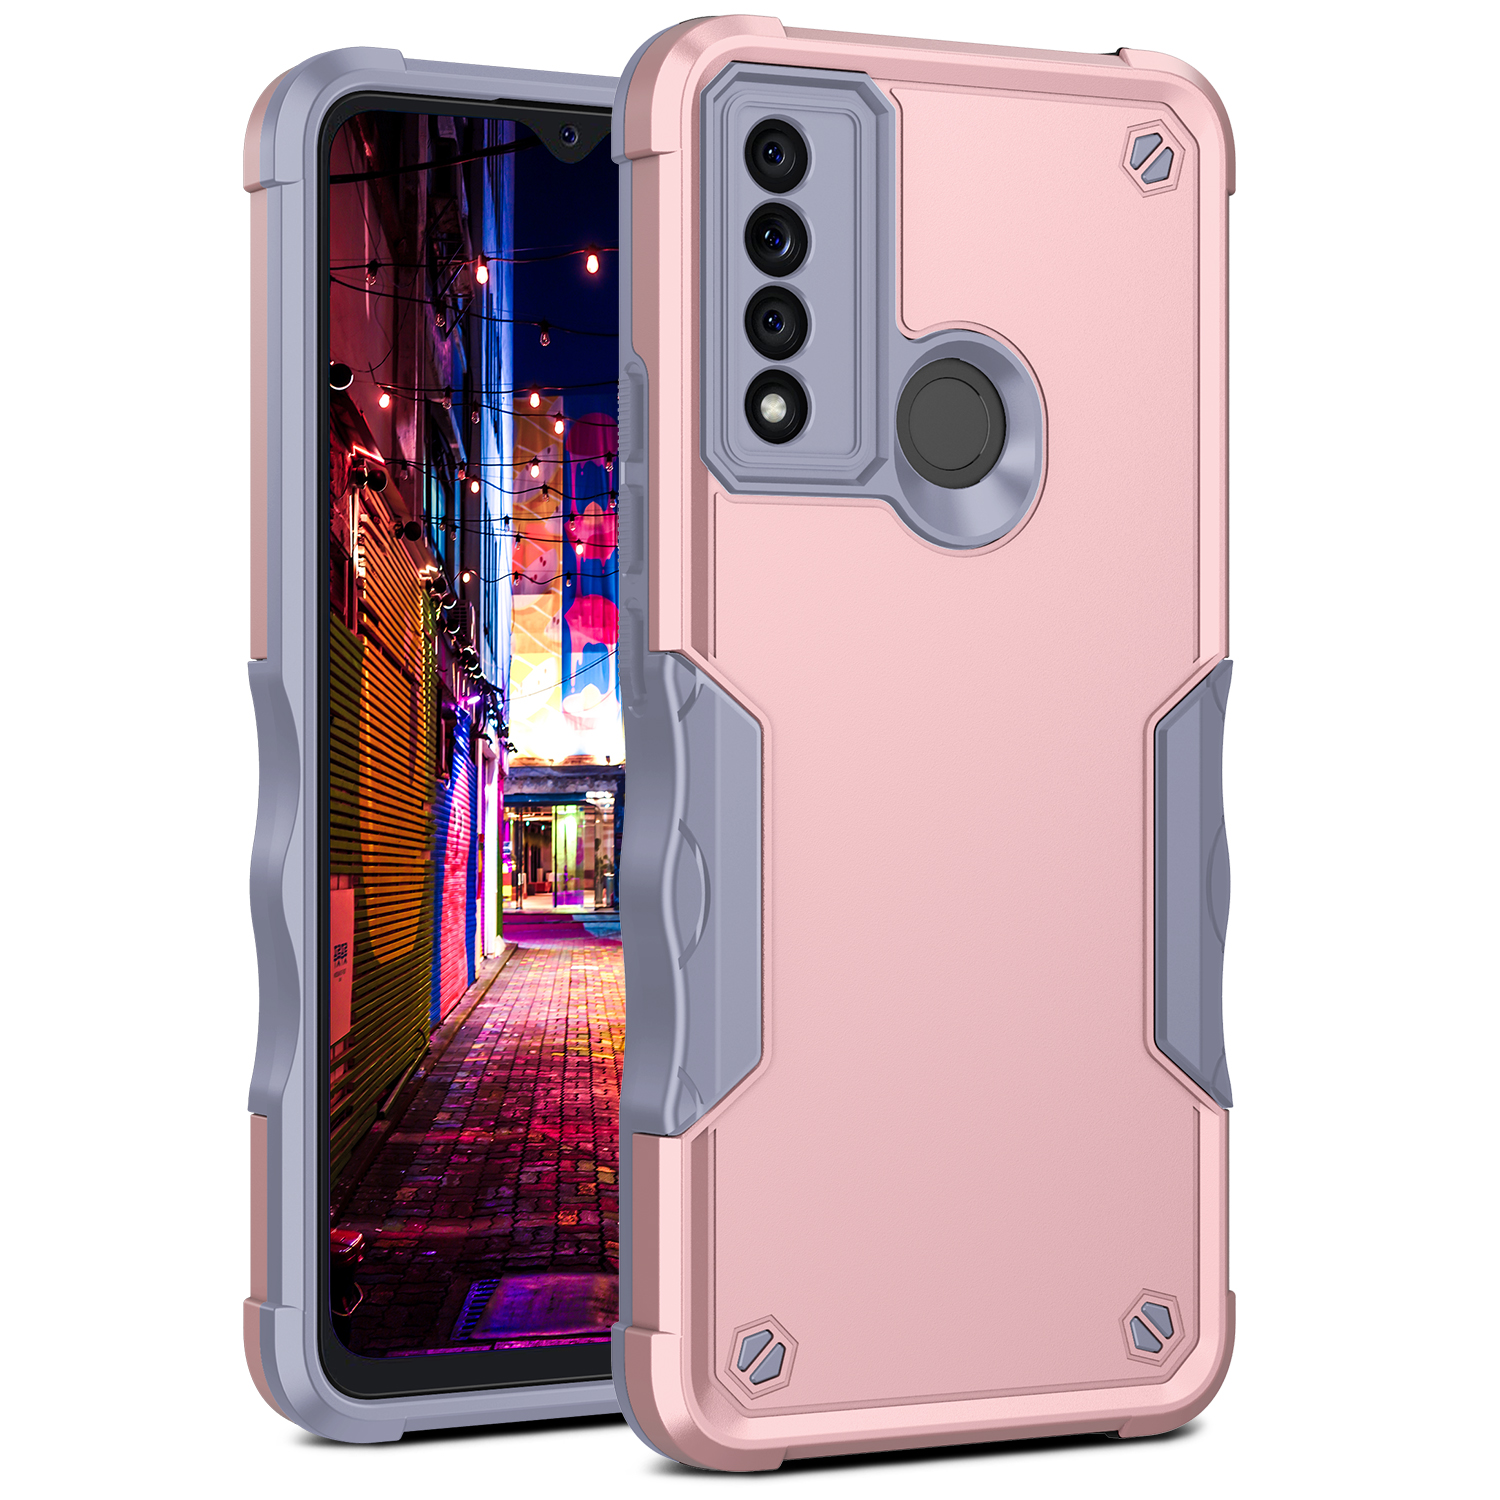 Strong Armor Grip Pattern Heavy Duty Shockproof Protective Cover Case for TCL 20 XE (Rose Gold)